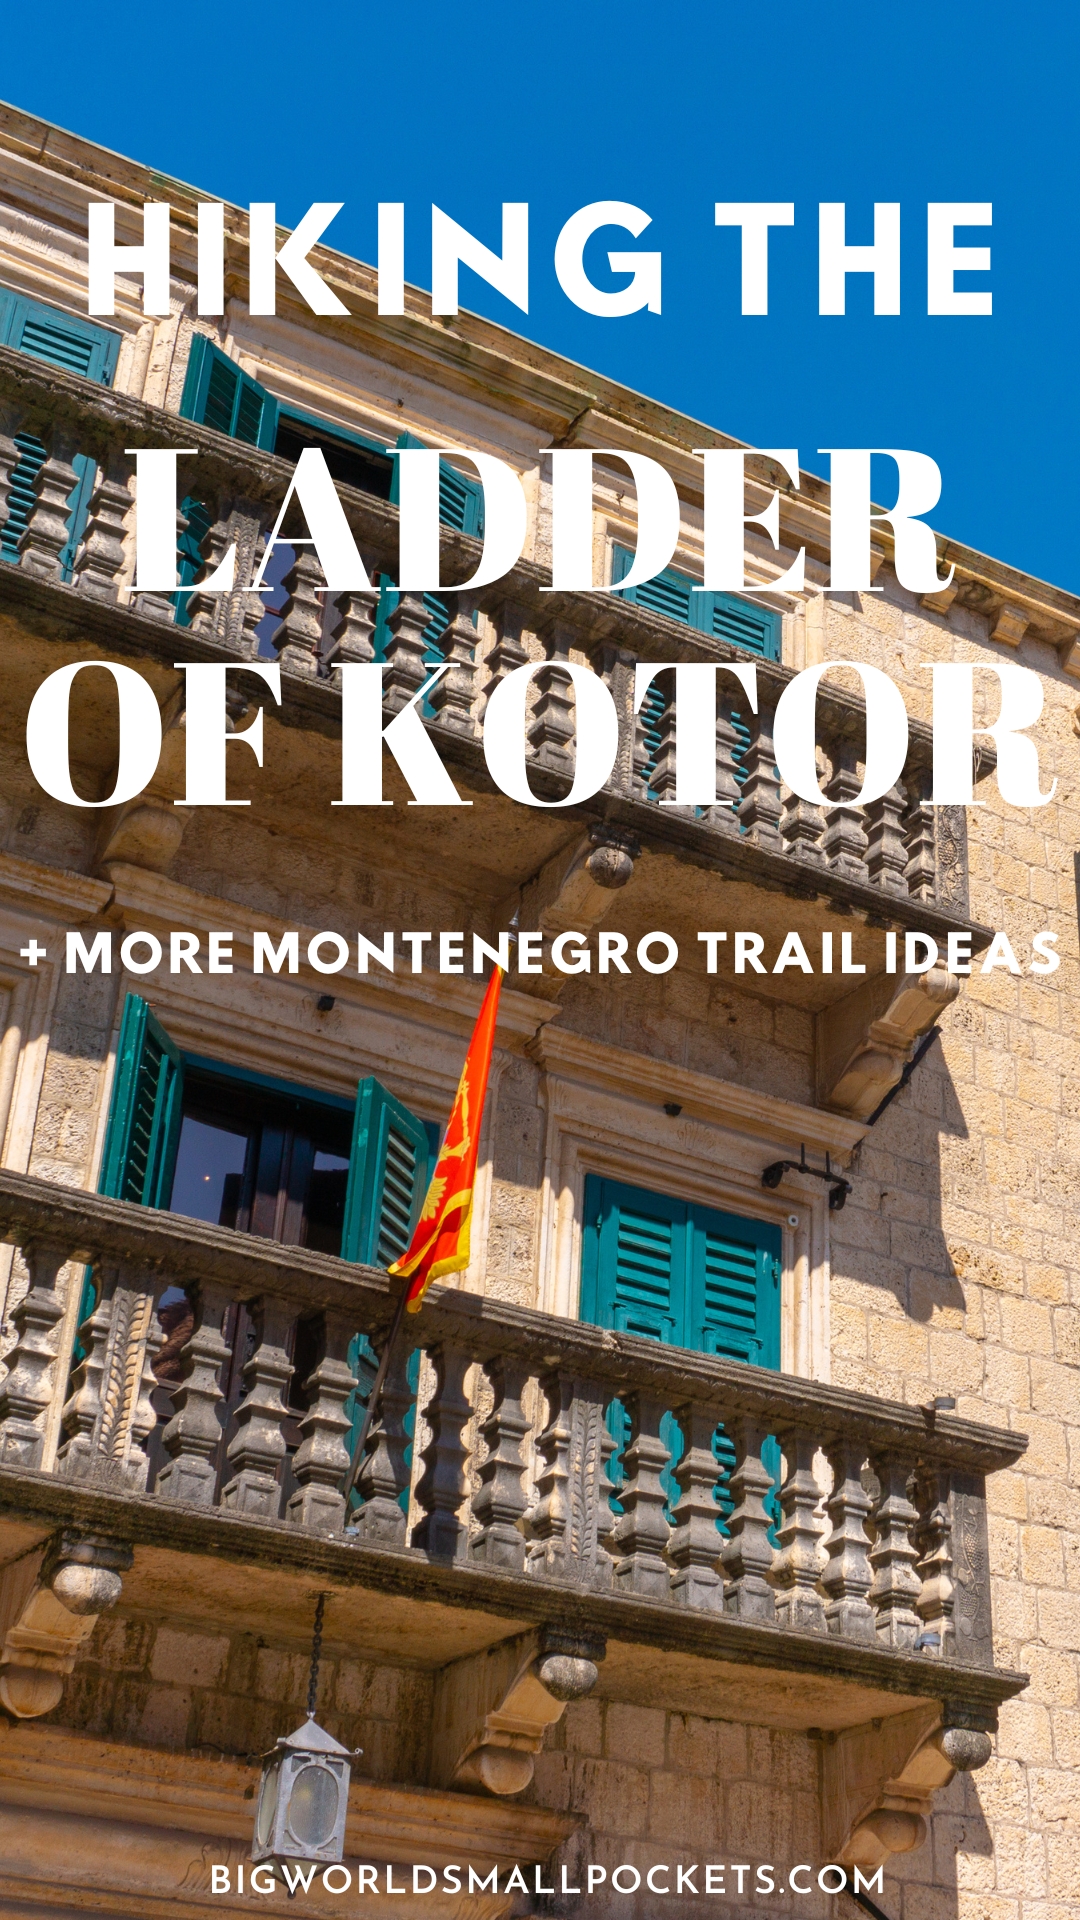 Hiking the Ladder of Kotor + Other Top Montenegro Trails